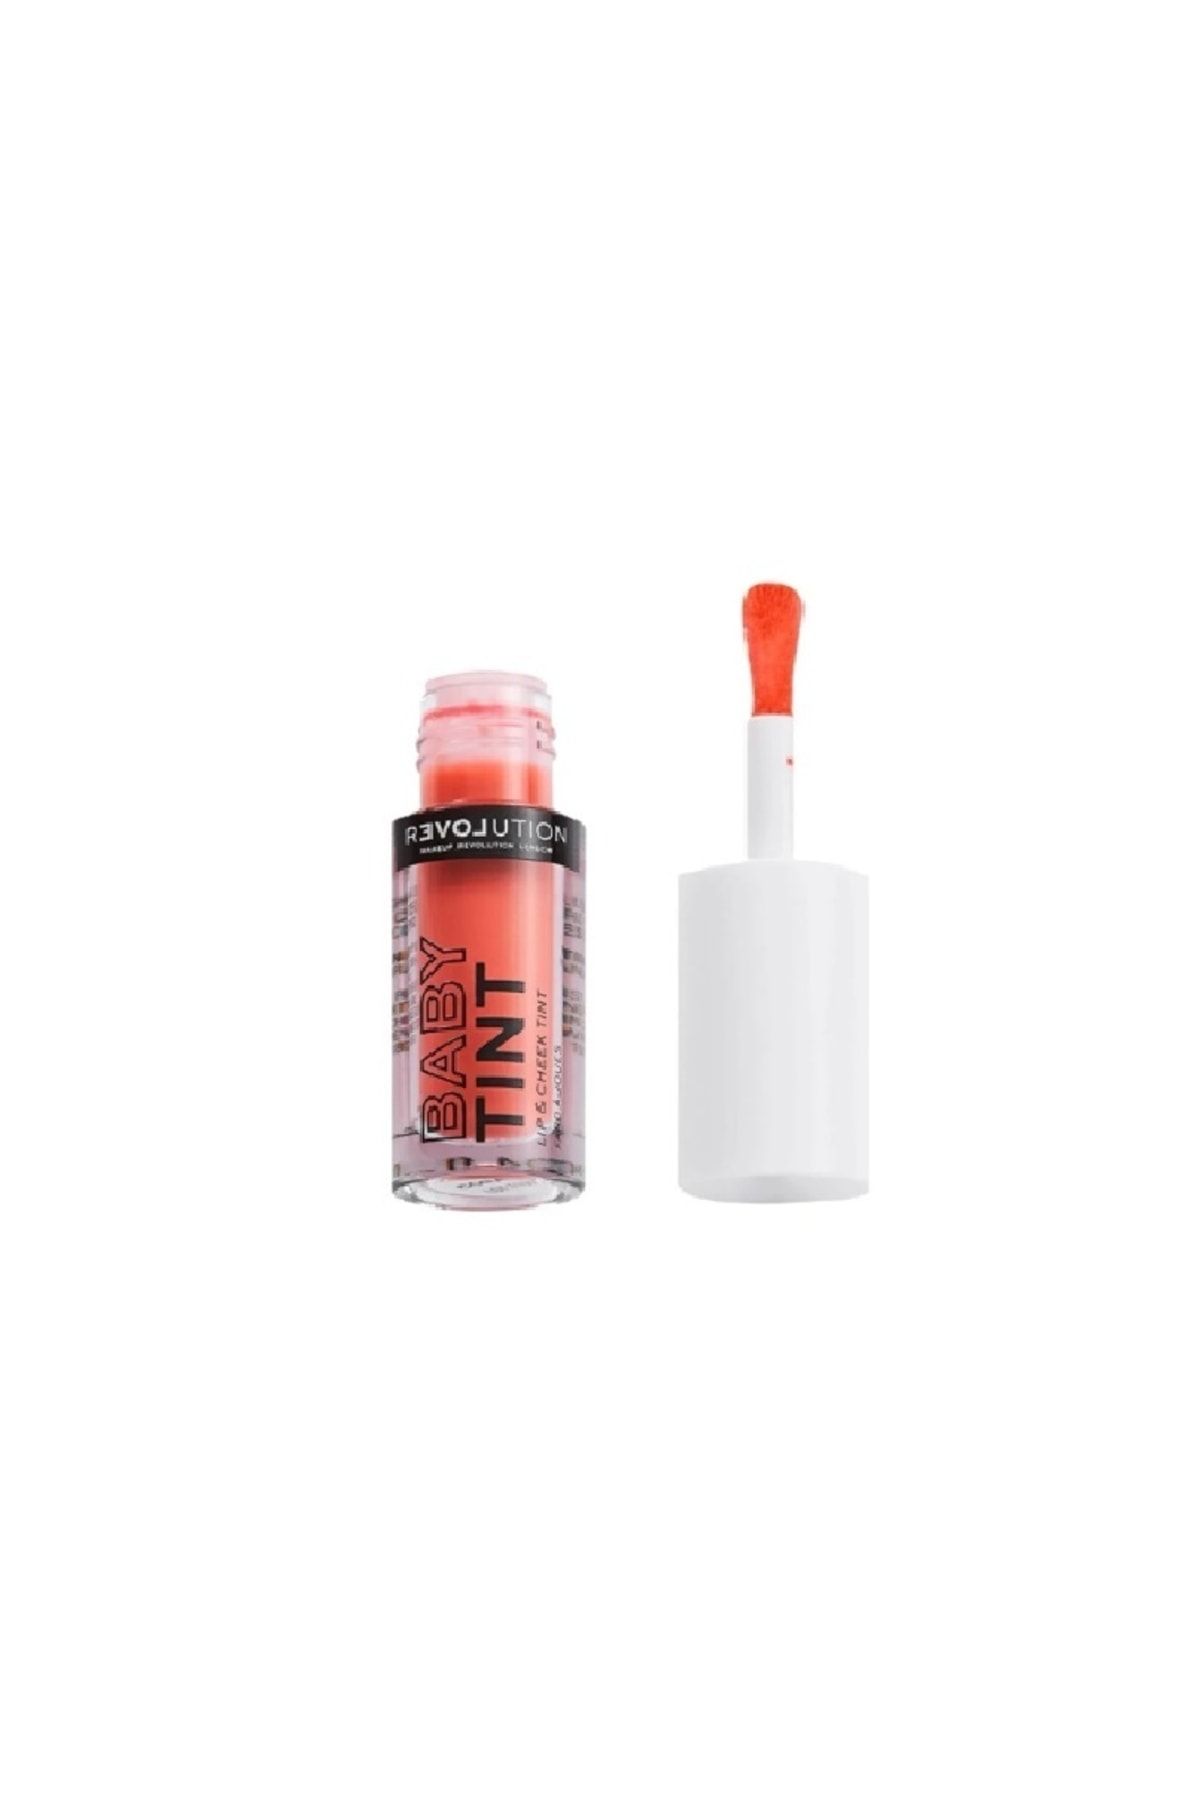 Relove by Revolution Baby Tint Coral Lip & Cheek